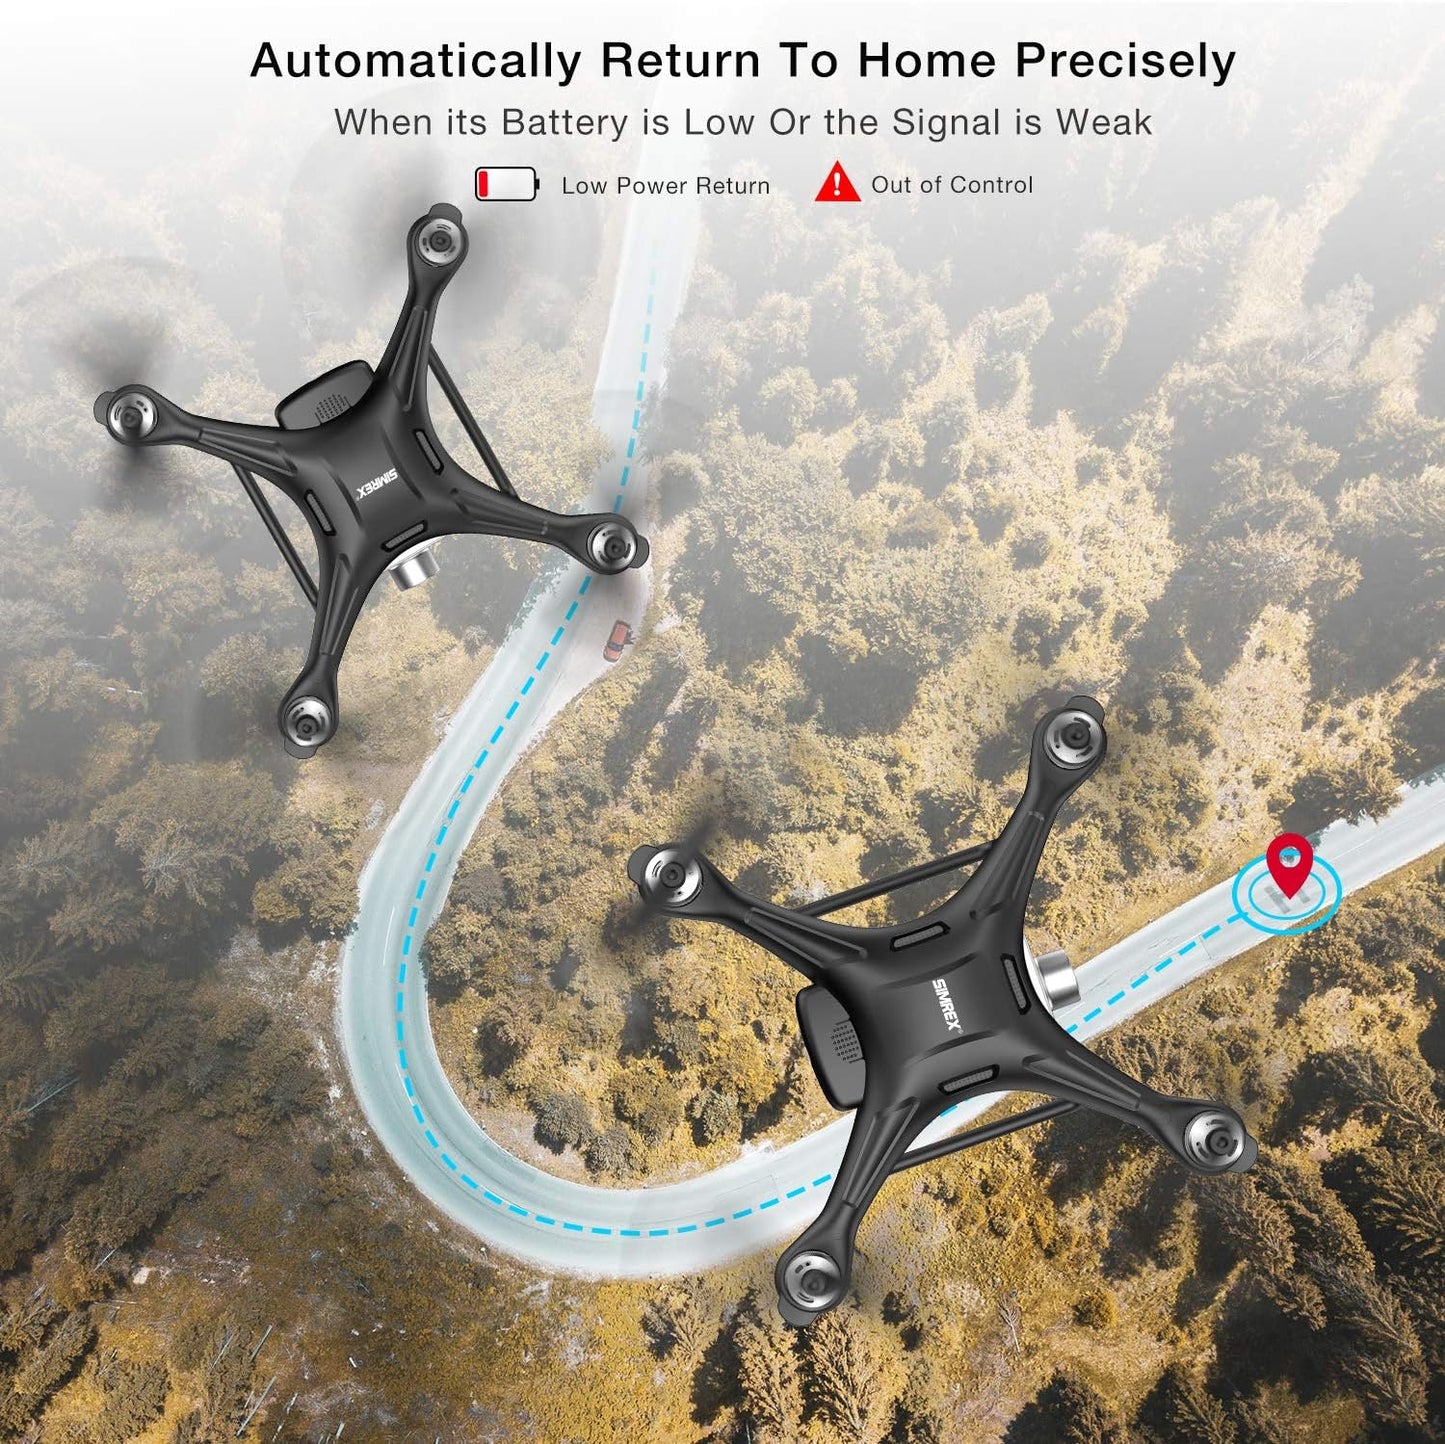 SIMREX X11 Upgraded GPS Drone 1080P HD Camera 2-Axis Self stabilizing Gimbal 5G WiFi FPV Video RC Quadcopter Auto Return with Follow Me Altitude Hold Headless Brushless Motor Remote Control